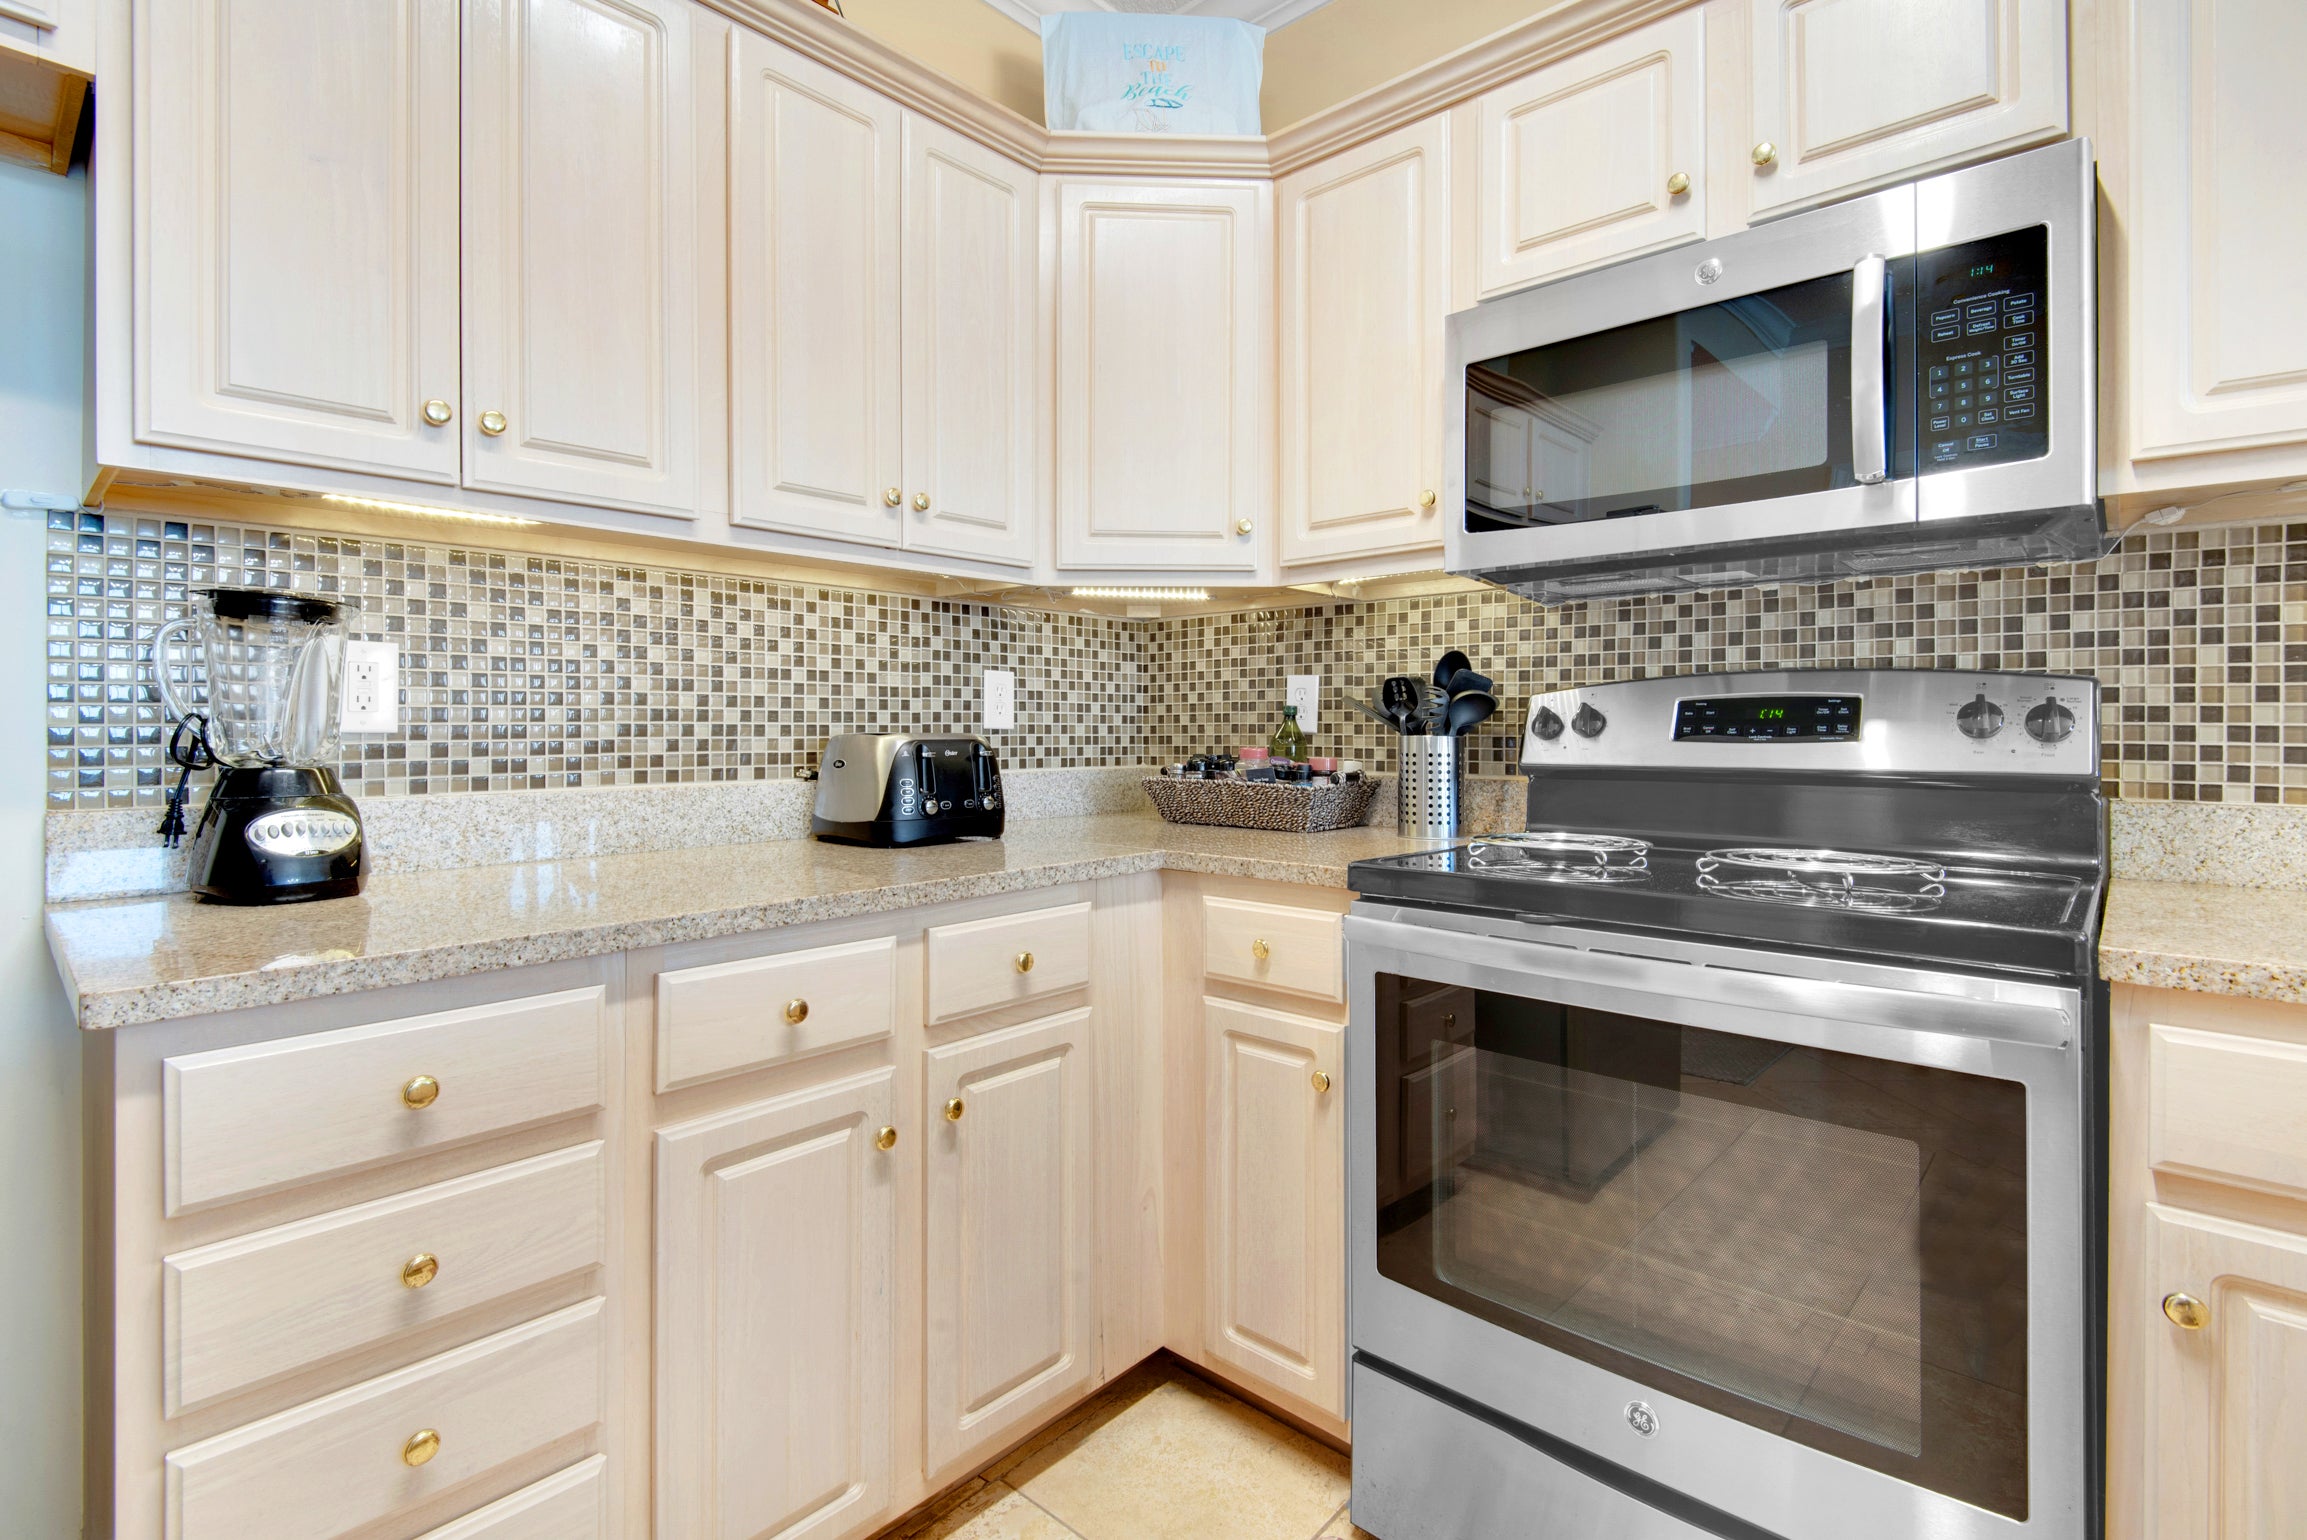 Granite Counter tops - Stainless Appliances